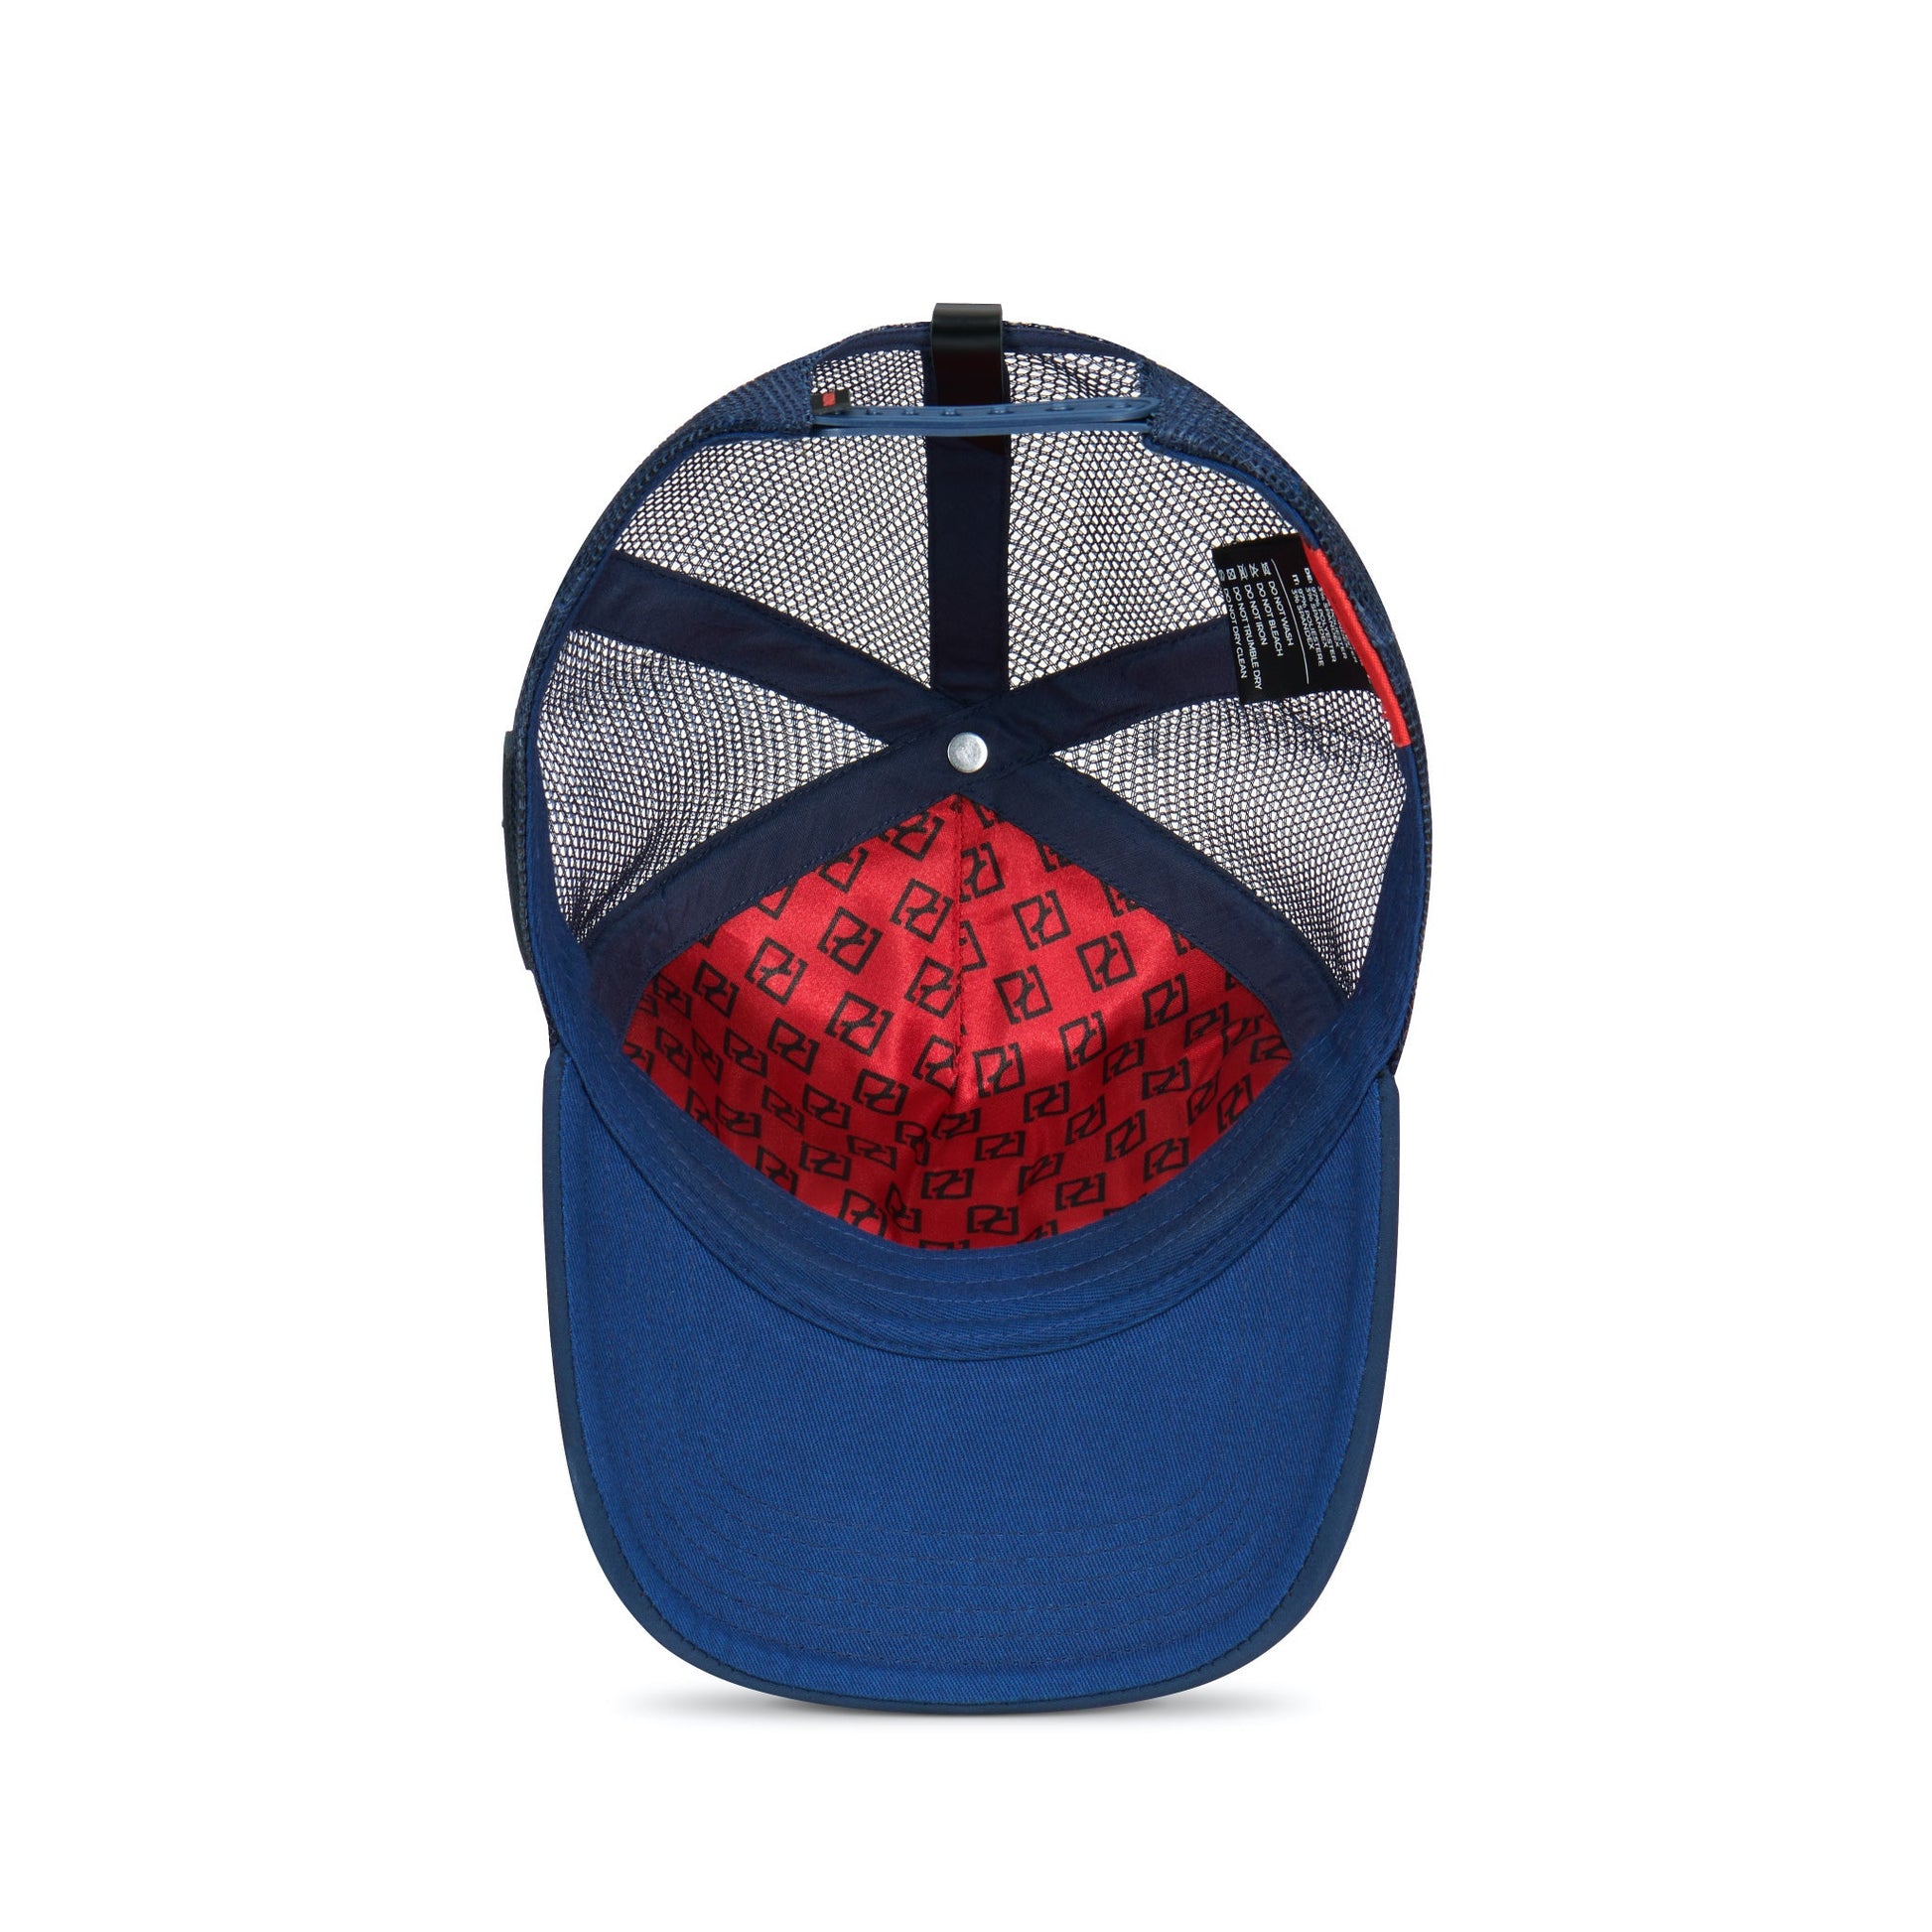 Partch Trucker Hat Navy Blue with PARTCH-Clip DWYL-R55 Inside View